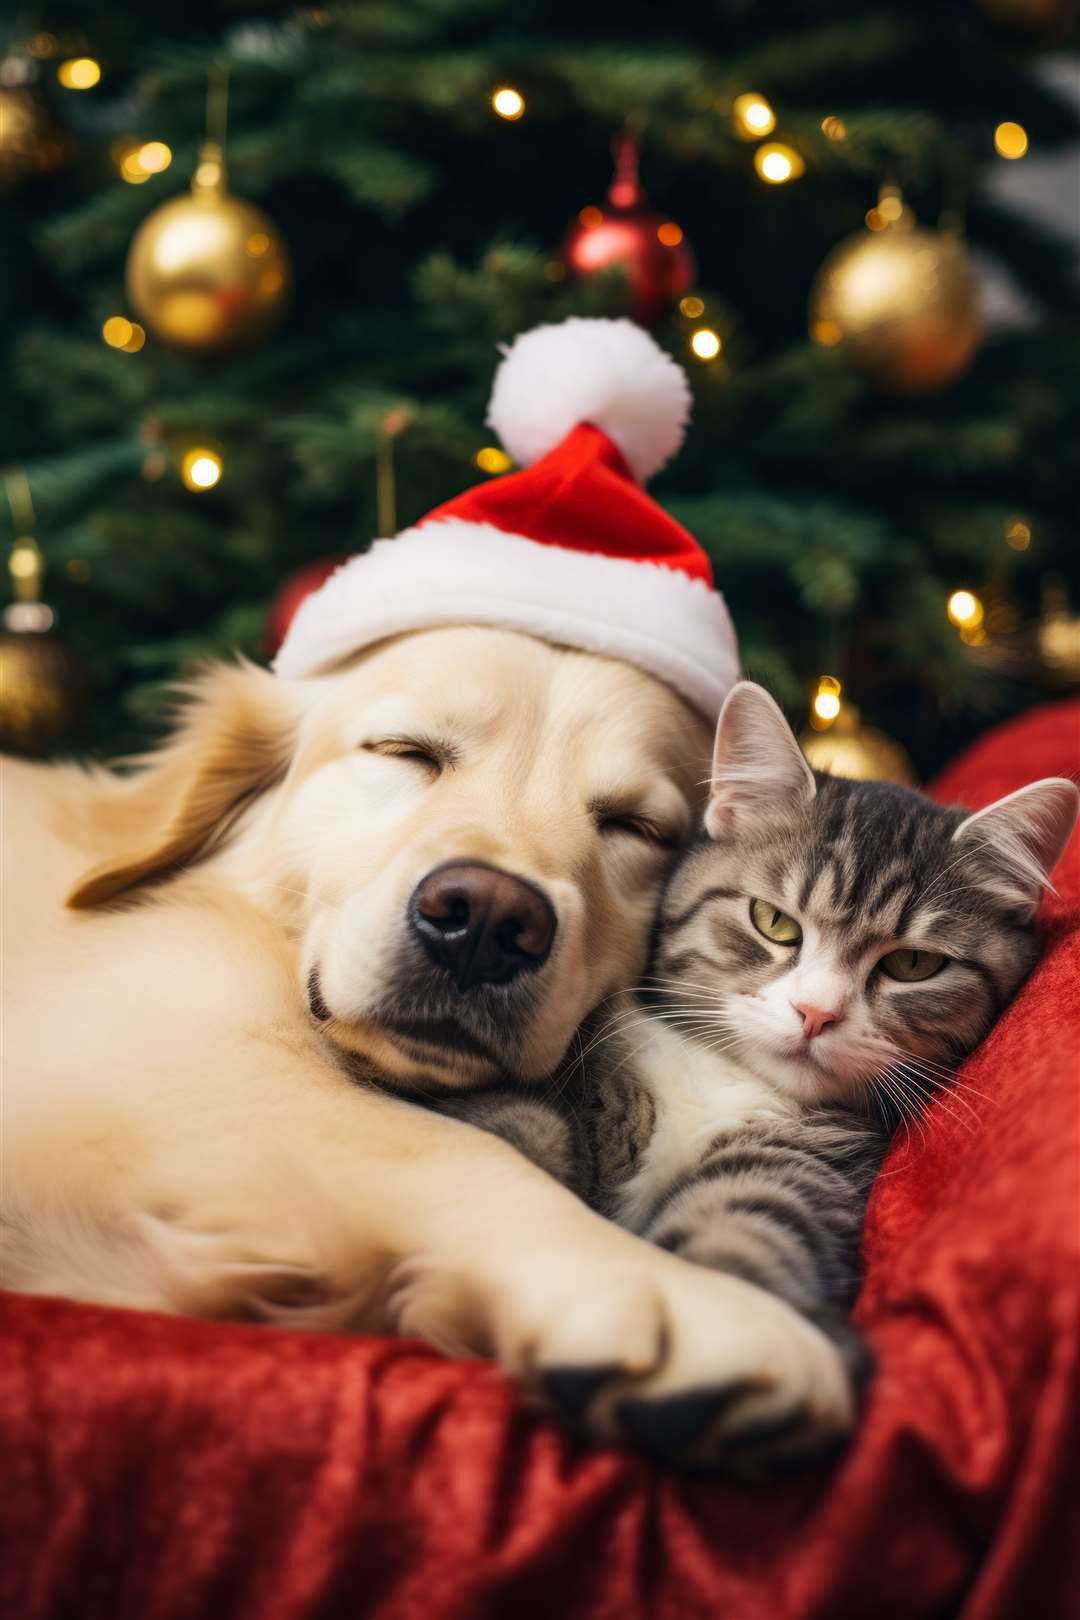 Best friends; they can have a great time over the festive period if you keep them safe.